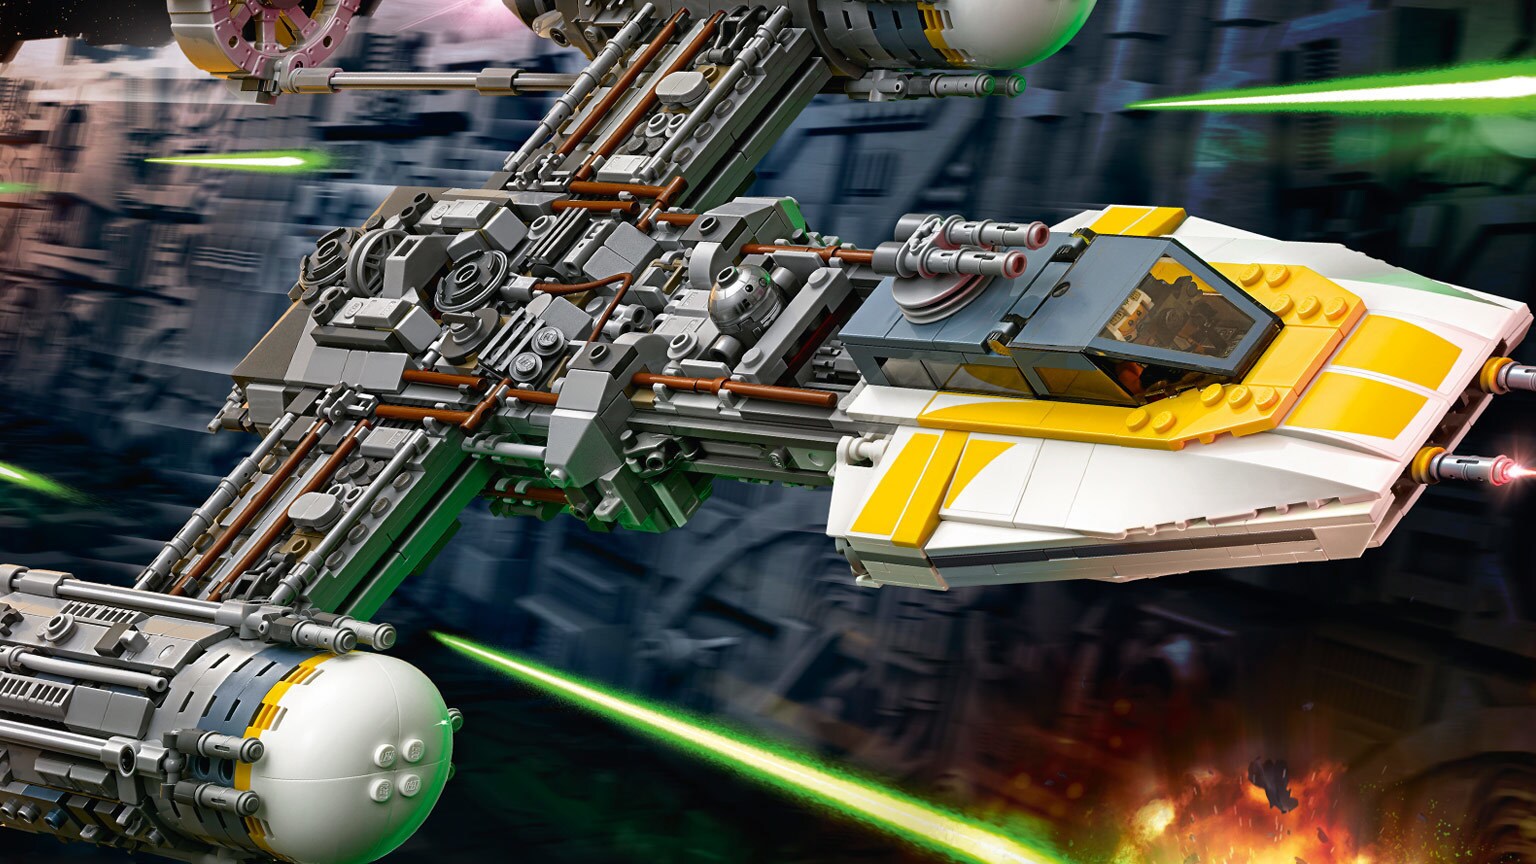 LEGO Star Wars UCS Y-Wing Exclusive Reveal